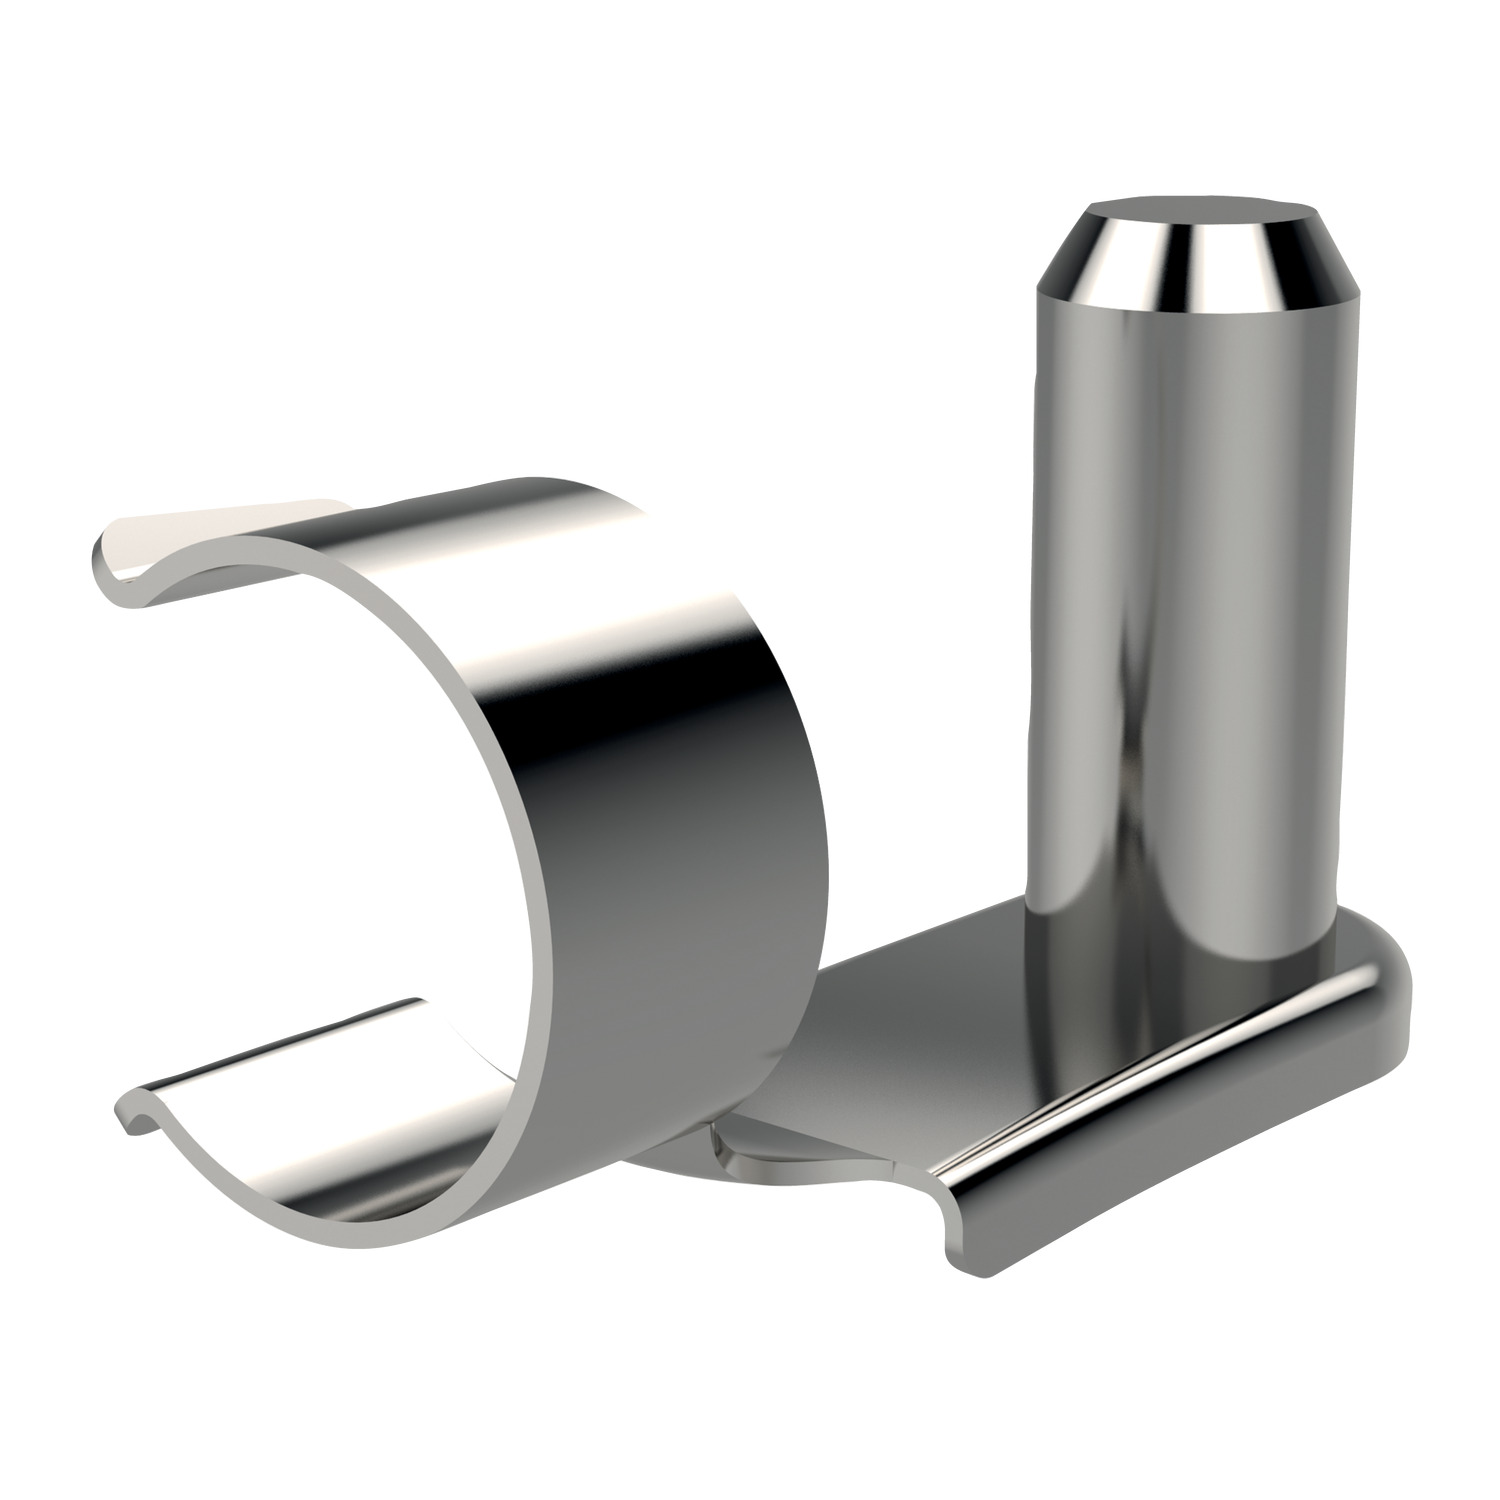 Clevis Retention Clips Stainless steel AISI 303 retention clip.  For use with R3402 and R3403.